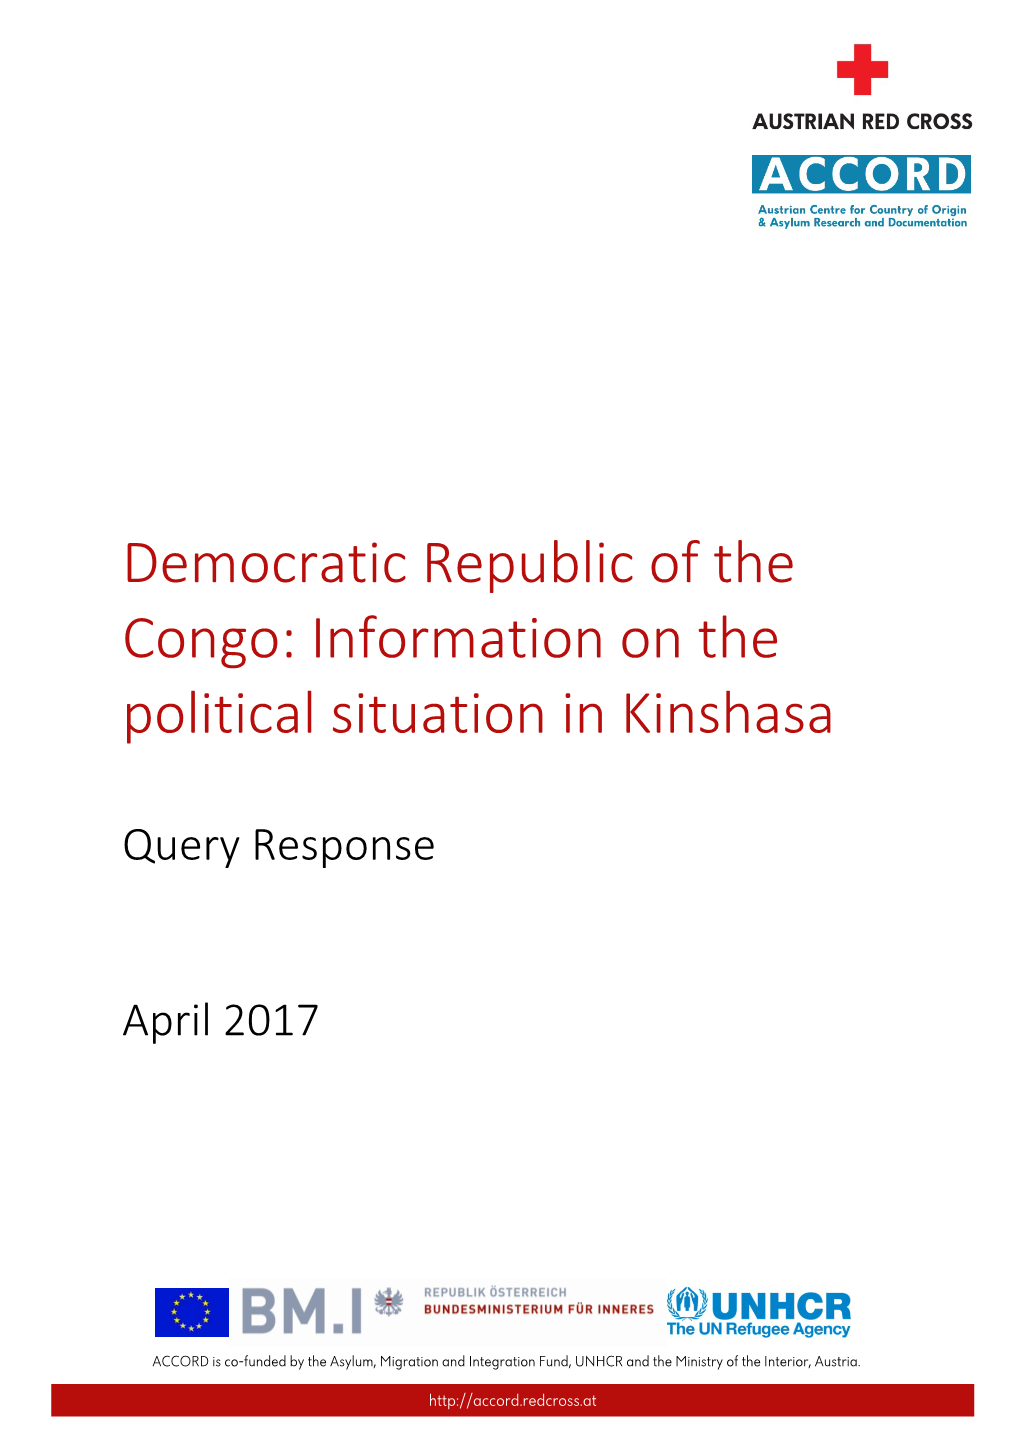 Democratic Republic of the Congo: Information on the Political Situation in Kinshasa